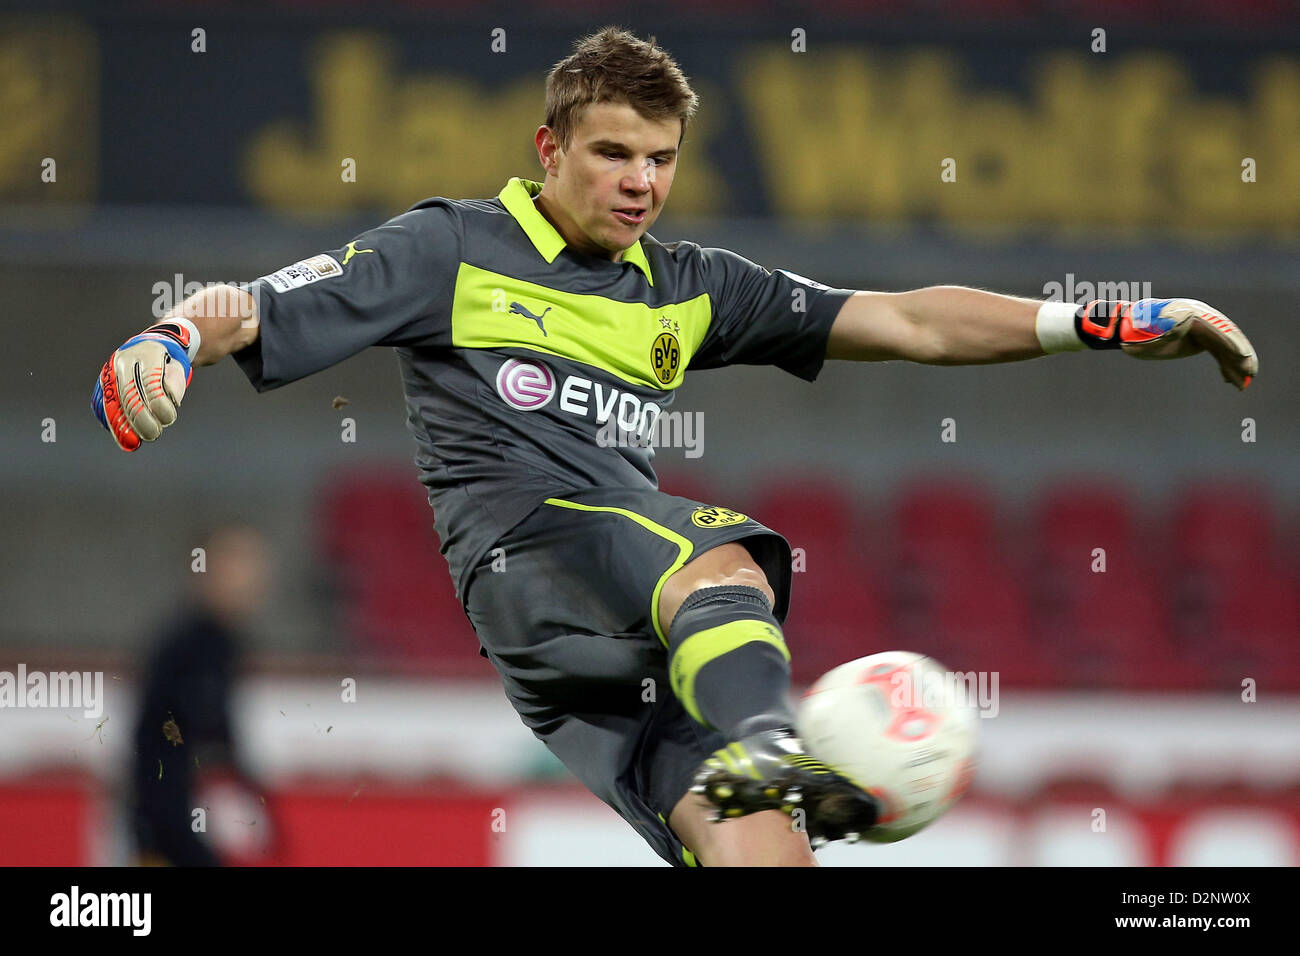 Dortmund's goalkeeper Mitchell Langerak plays the ball during the test match between 1. FC Cologne and Borussia Dortmund at RheinEnergieStadion in Cologne, Germany, 28 January 2013. Photo: Kevin Kurek Stock Photo